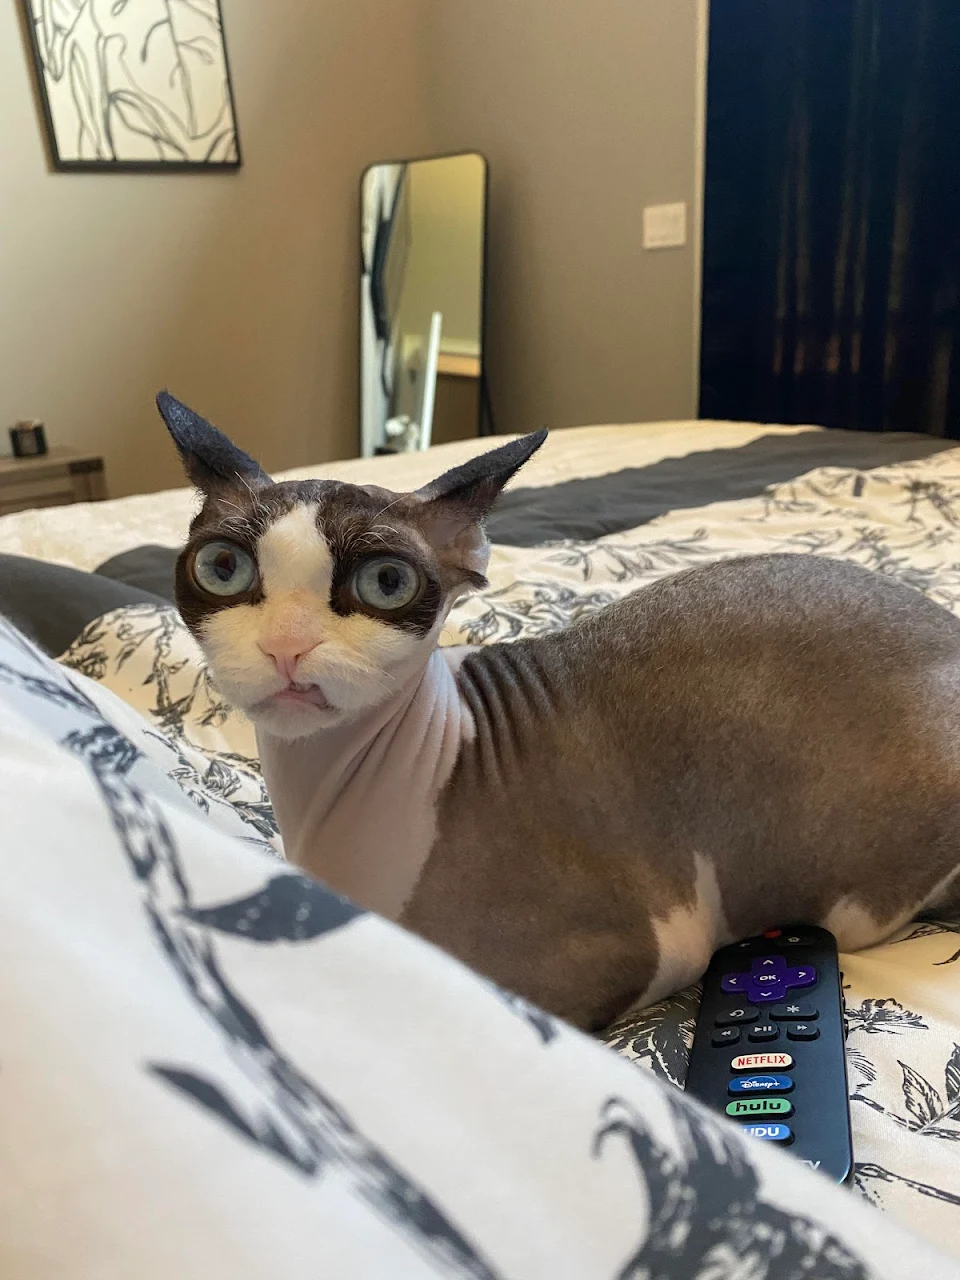 This Sphinx cat with a remote